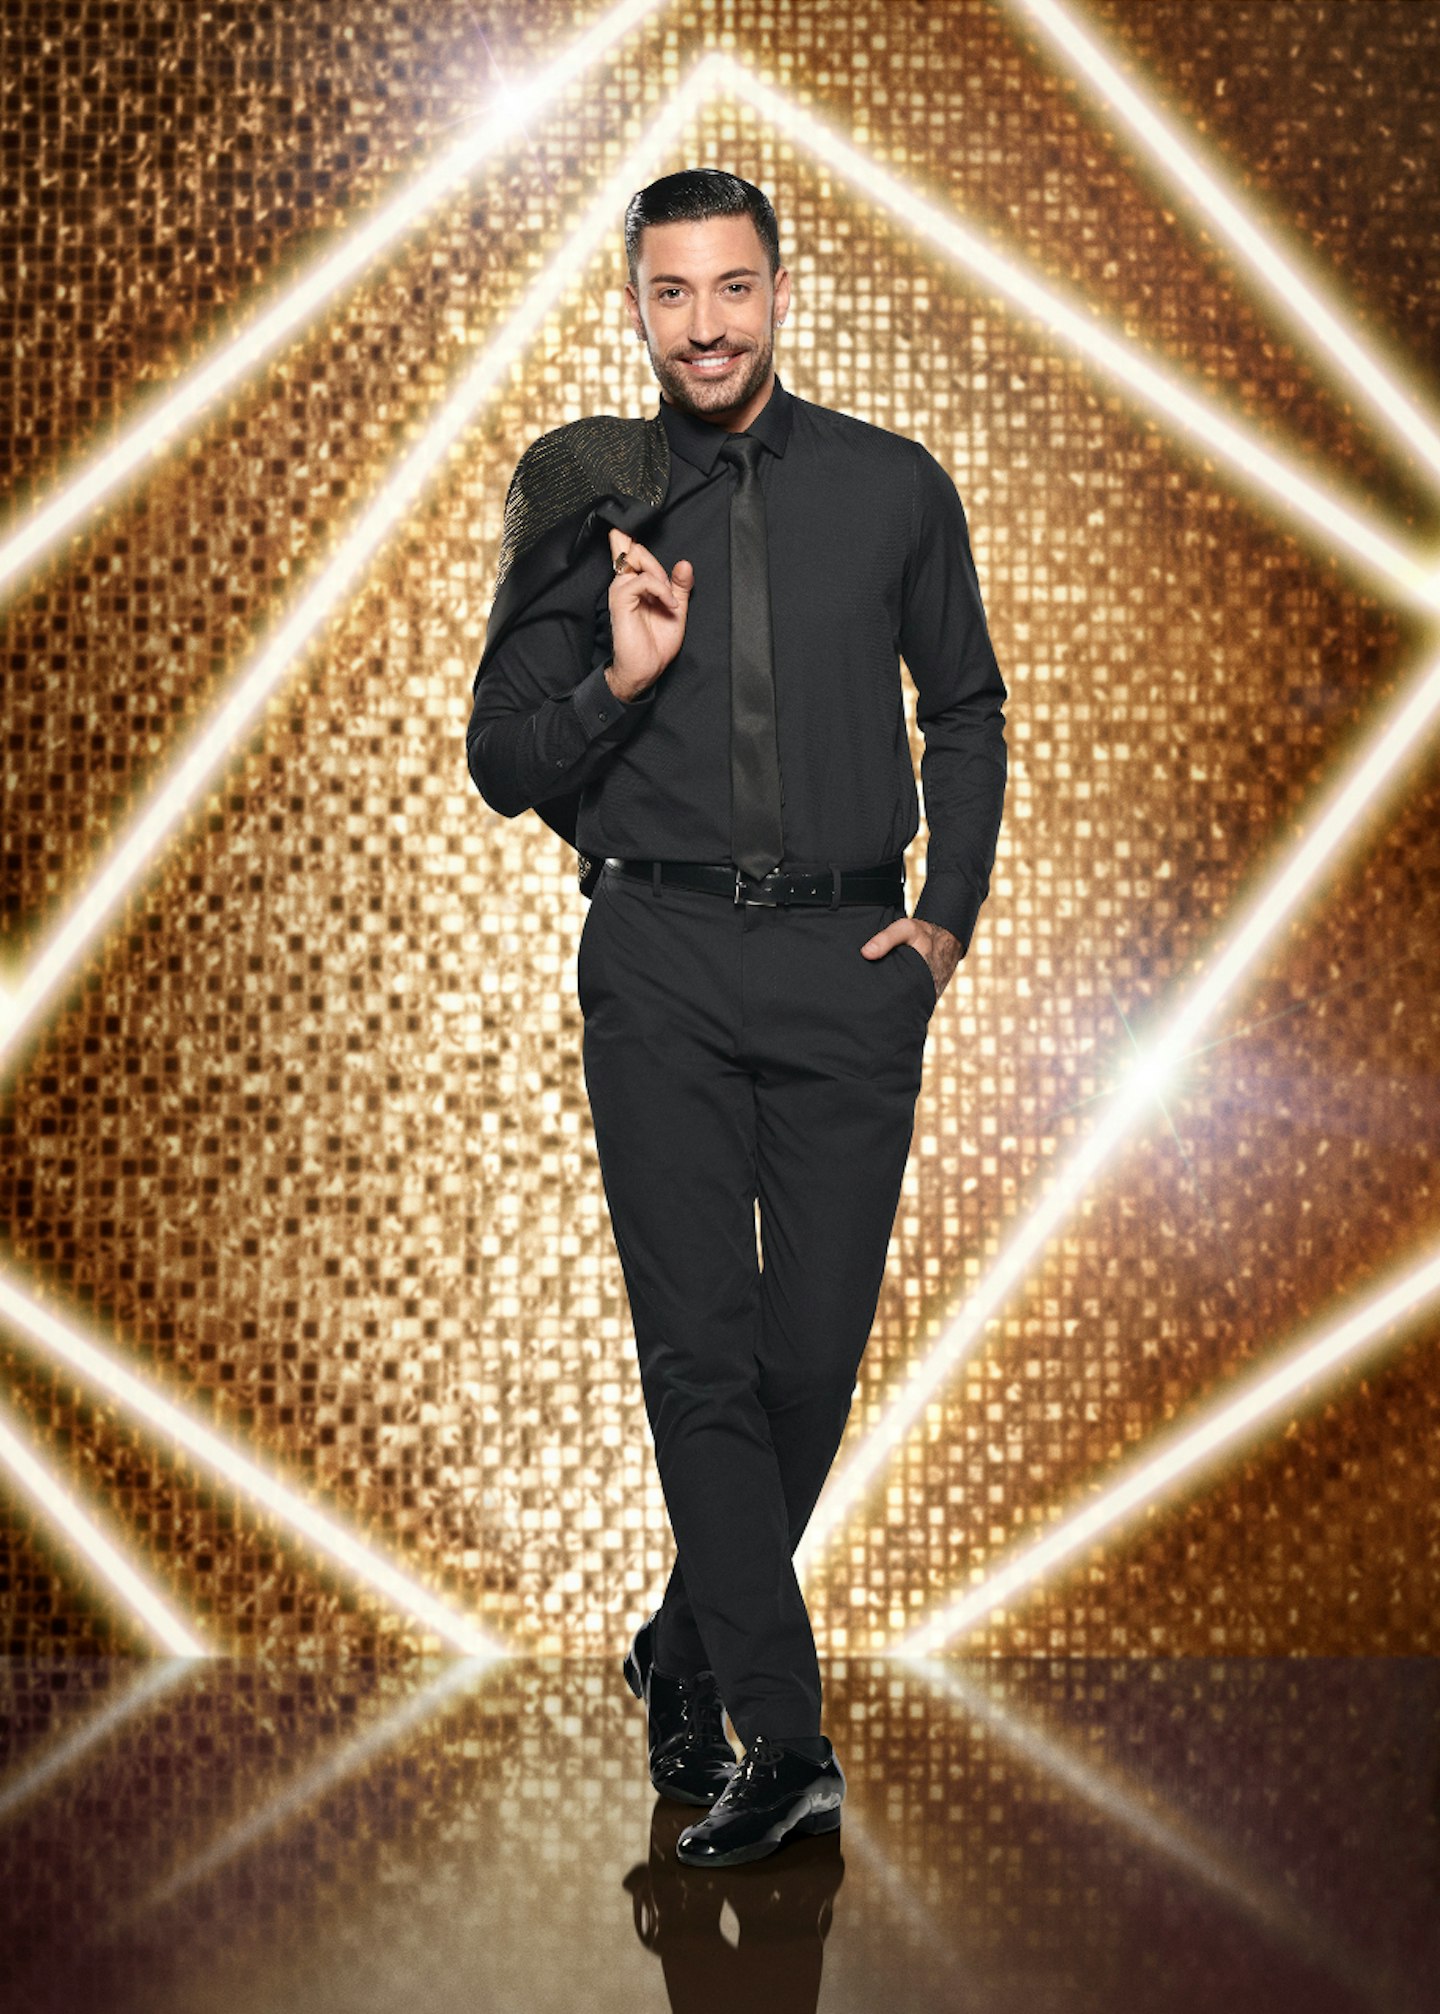 Strictly professional dancer Giovanni Pernice